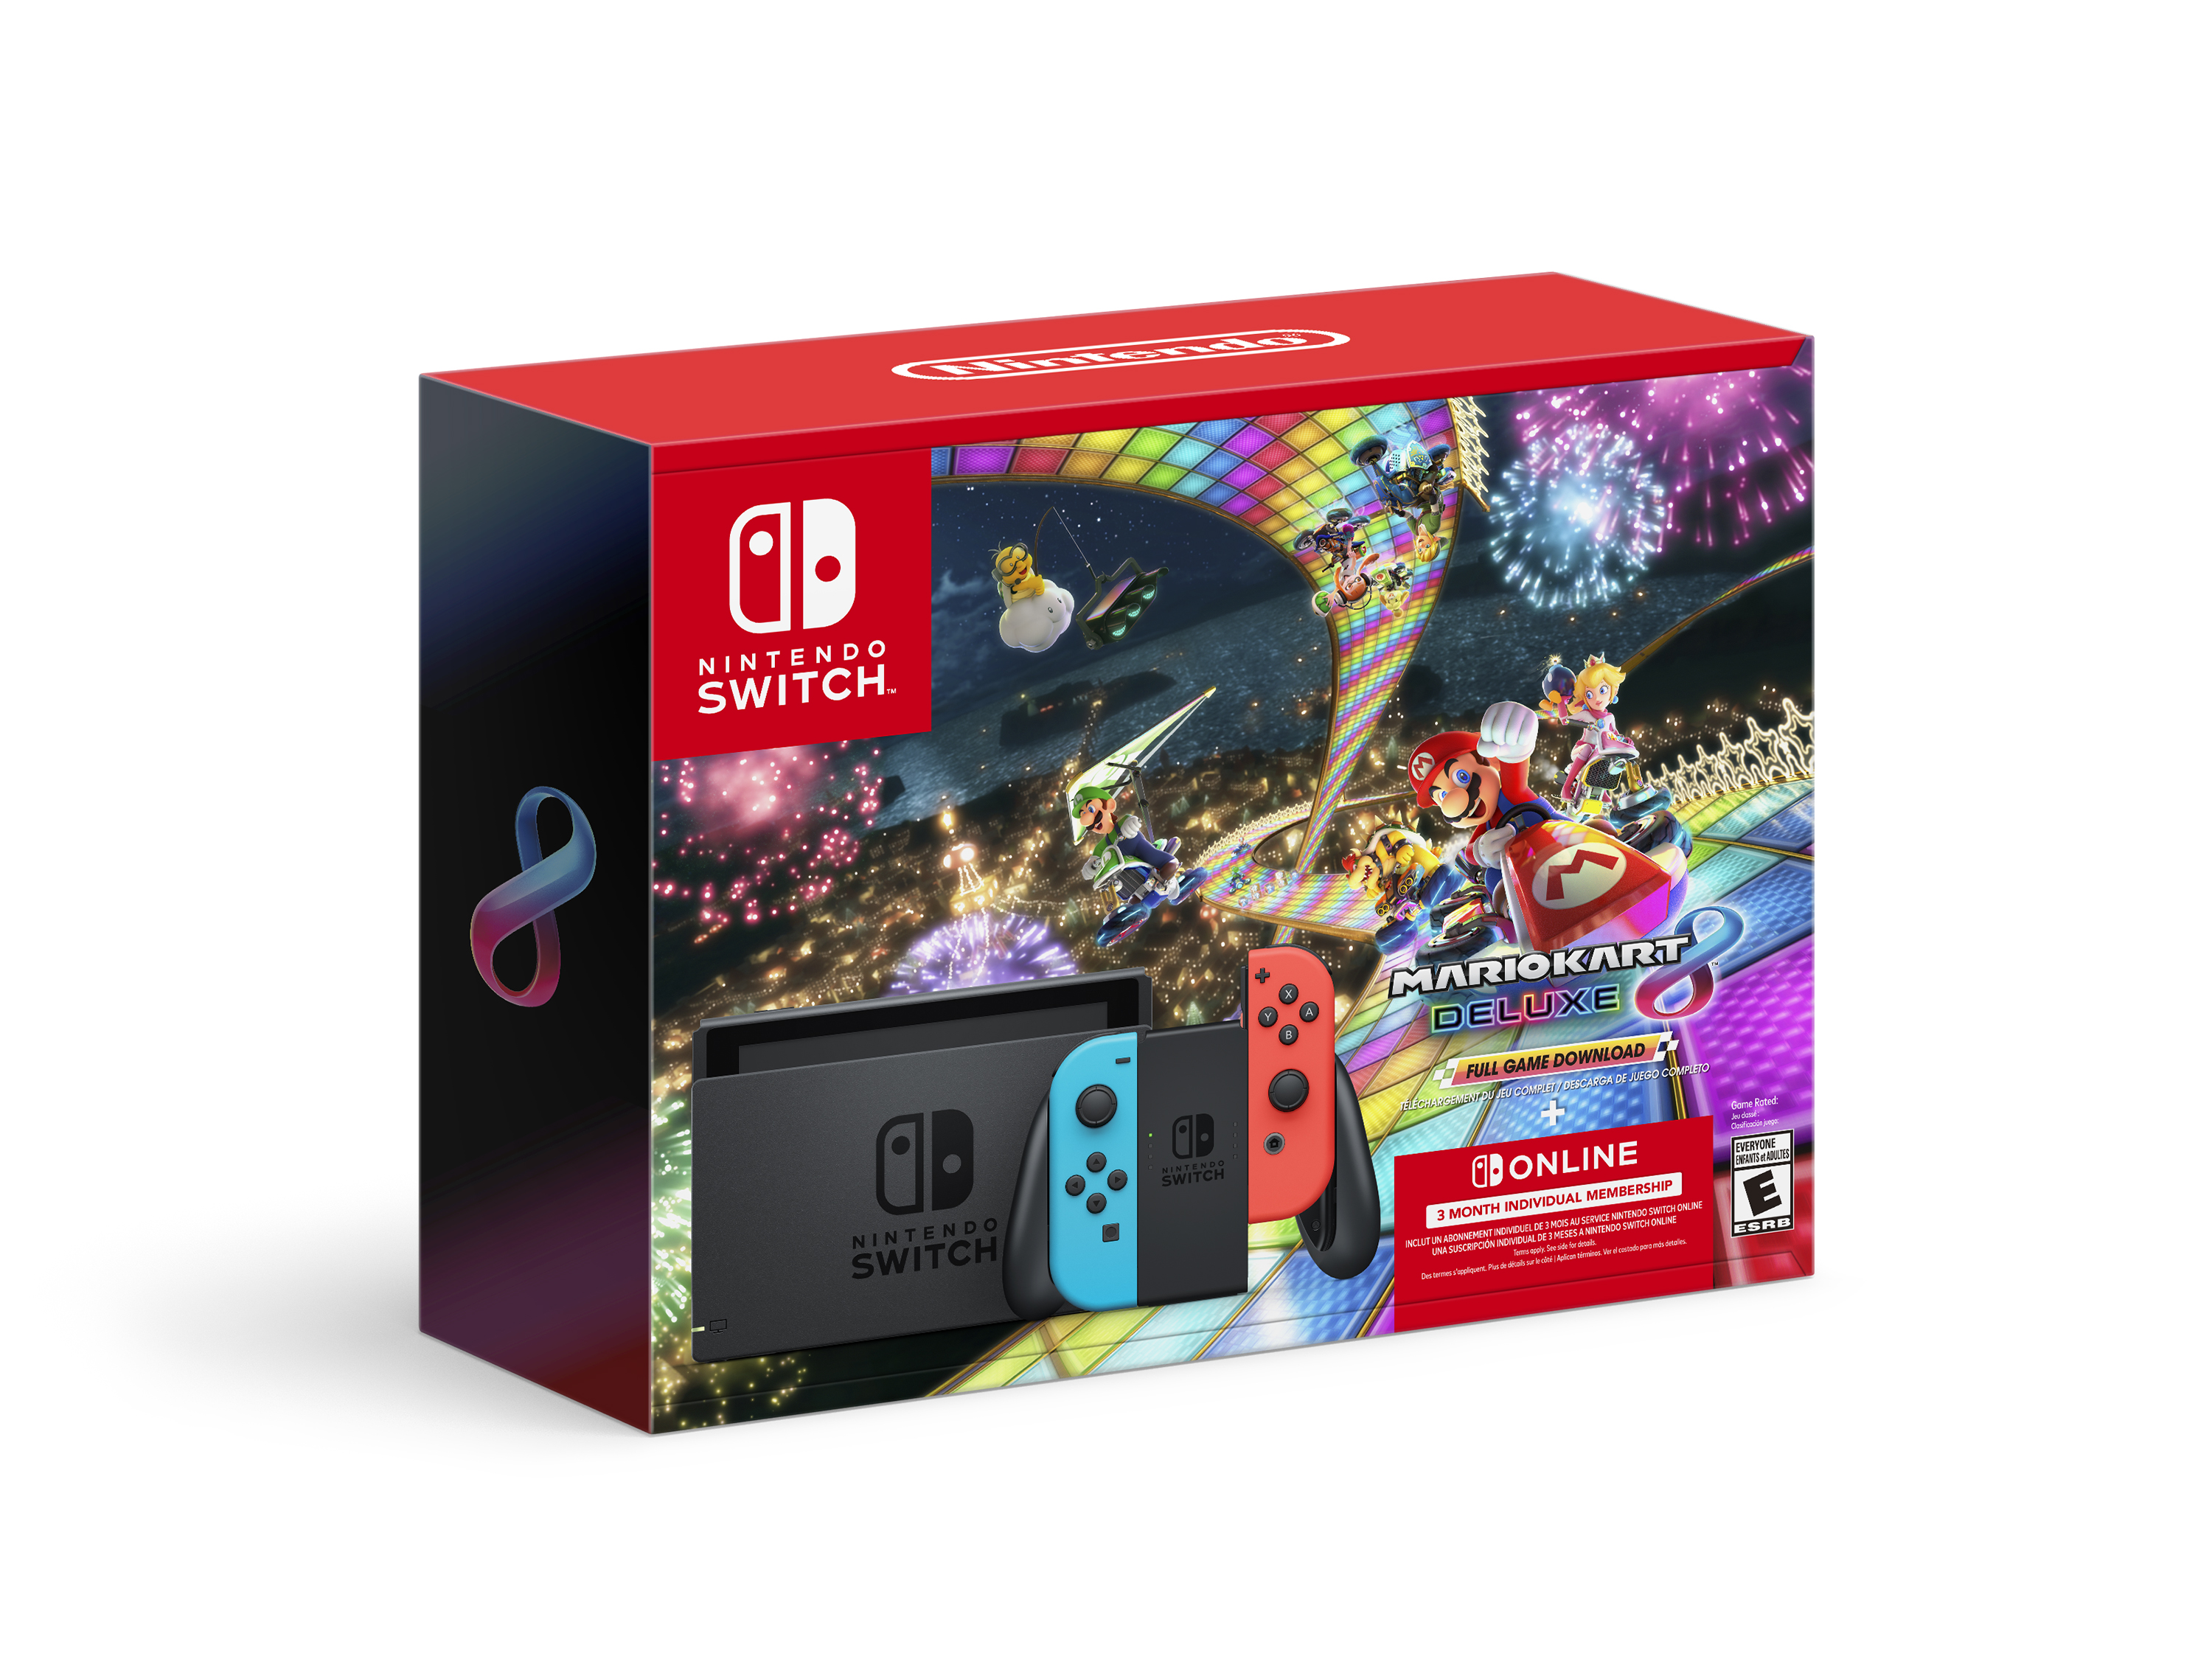 Nintendo Switch™ w/ Neon Blue & Neon Red Joy-Con™ + Mario Kart™ 8 Deluxe (Full Game Download) + 3 Month Nintendo Switch Online Individual Membership - image 1 of 10